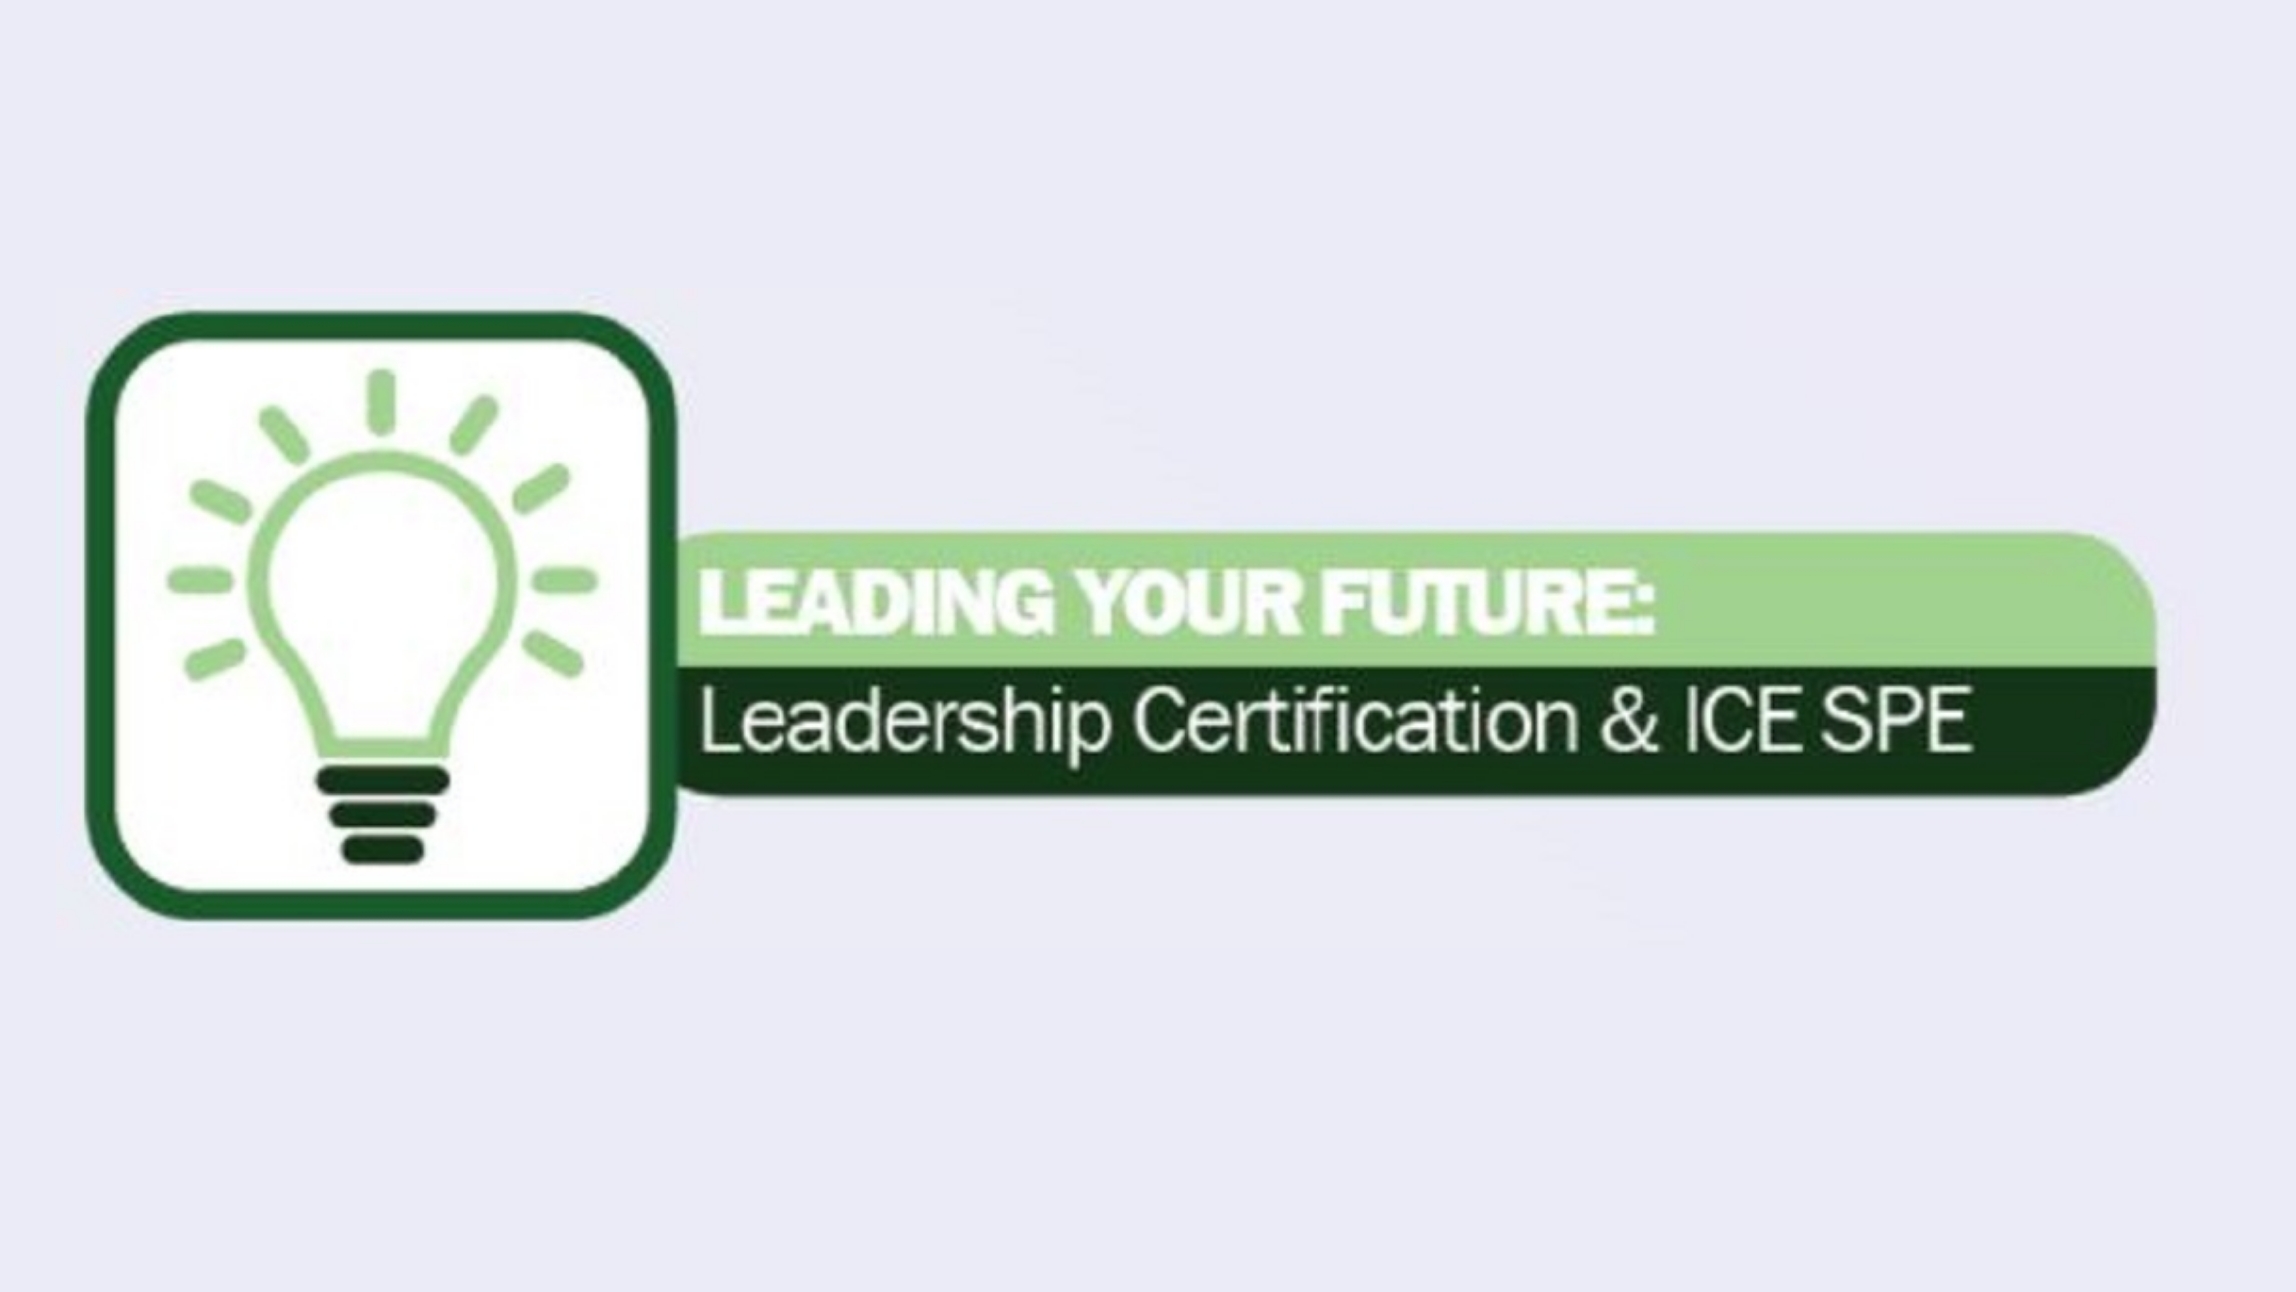 Leading Your Future: Leadership Certification & ICE SPE